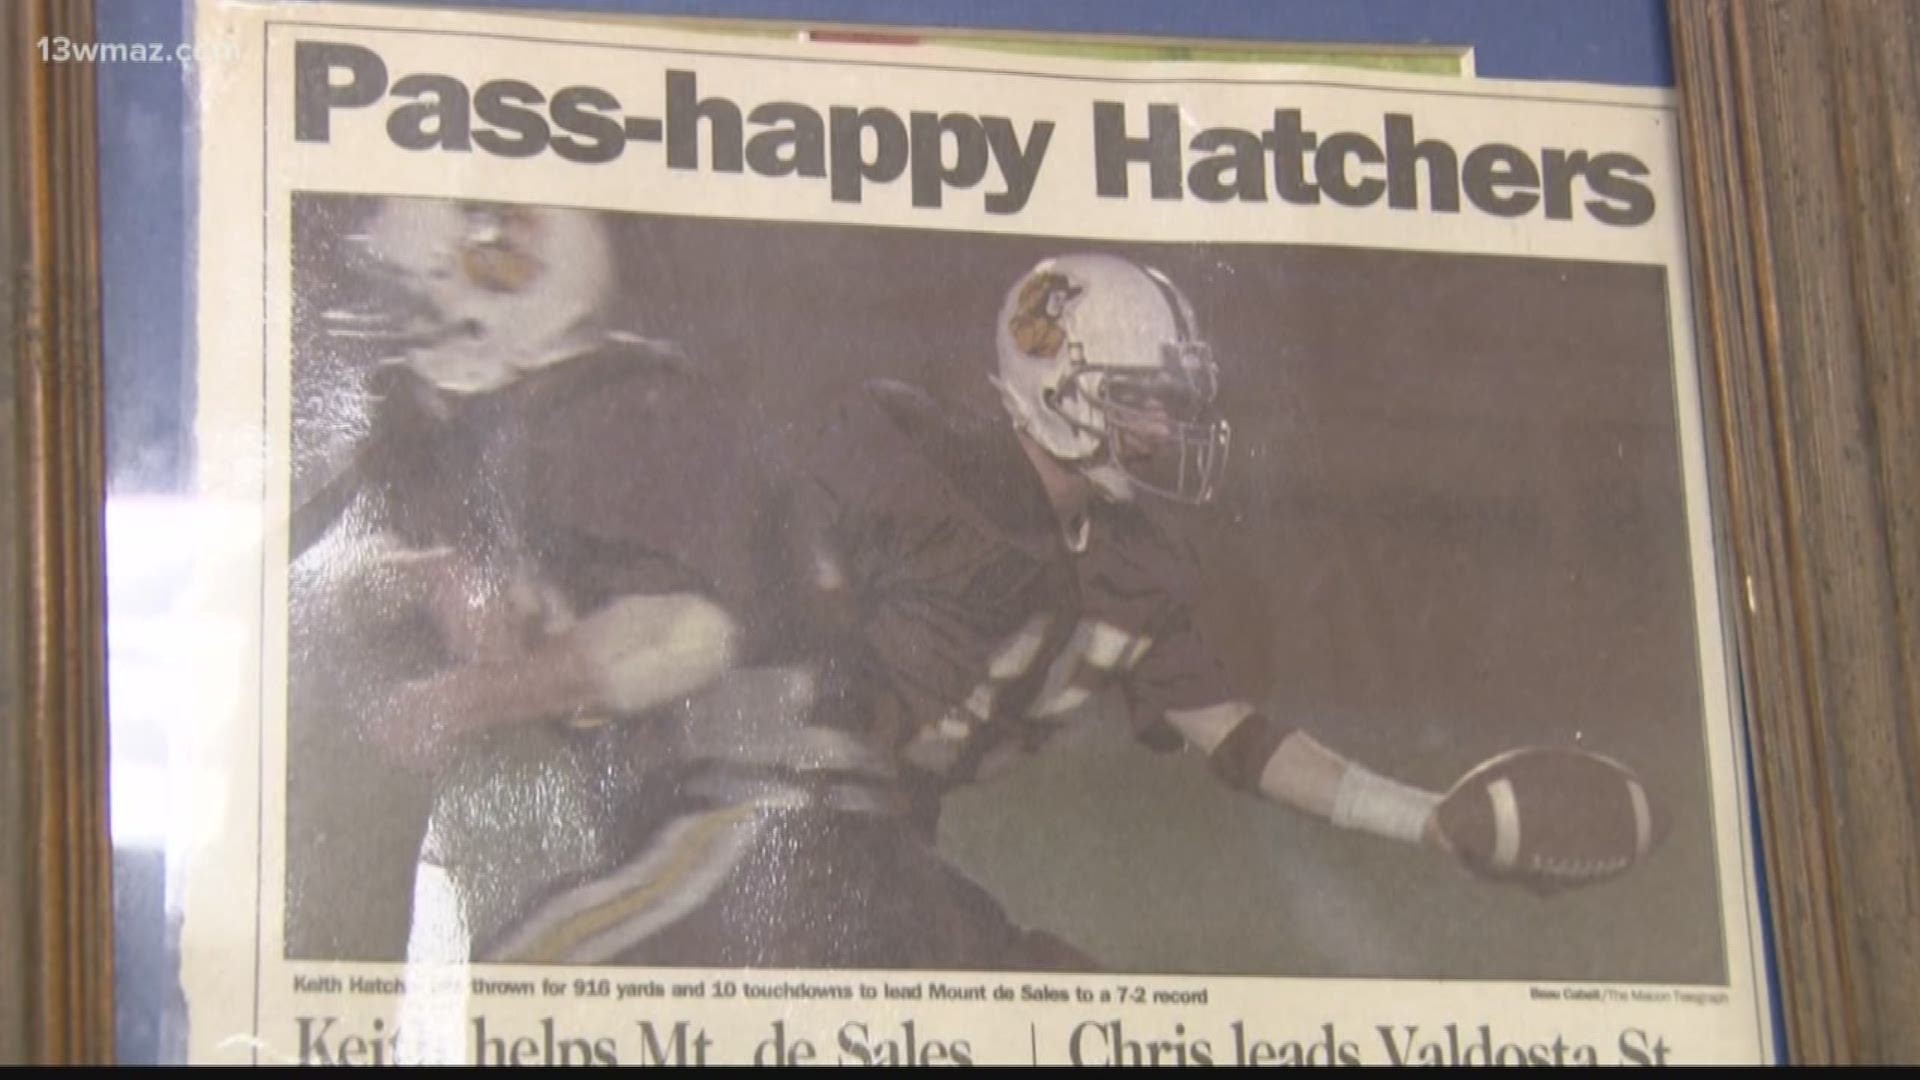 At Mount de Sales Academy, the Hatcher family has been playing sports here for decades. Head coach Keith Hatcher talks about his family's legacy.